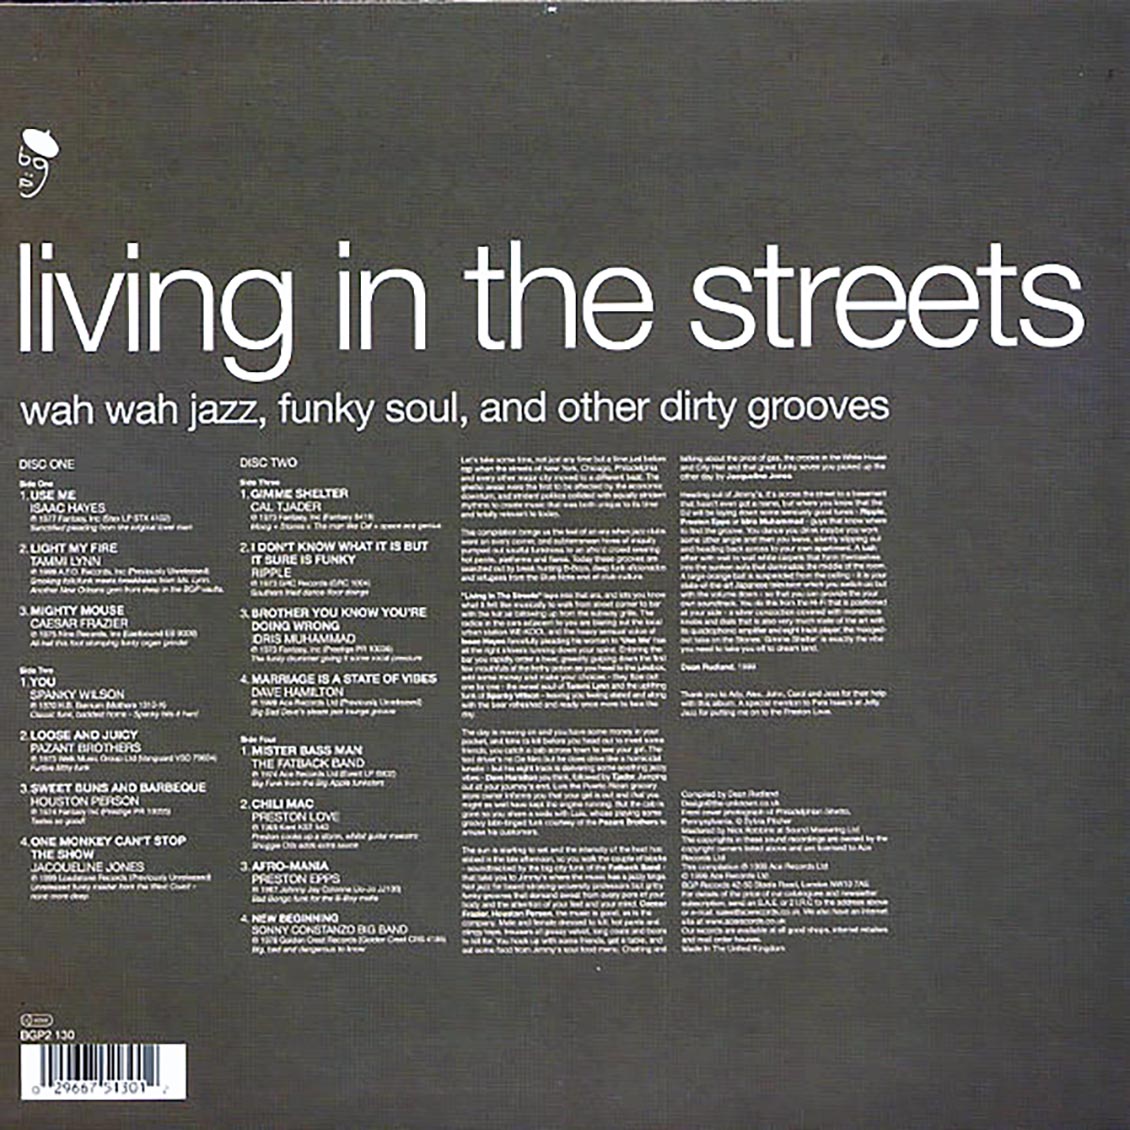 Cal Tjader, Isaac Hayes, Idris Muhammad, Dave Hamilton, Etc. - Living In The Streets: Wah Wah Jazz, Funky Soul, And Other Dirty Grooves (2xLP) - Vinyl LP, LP